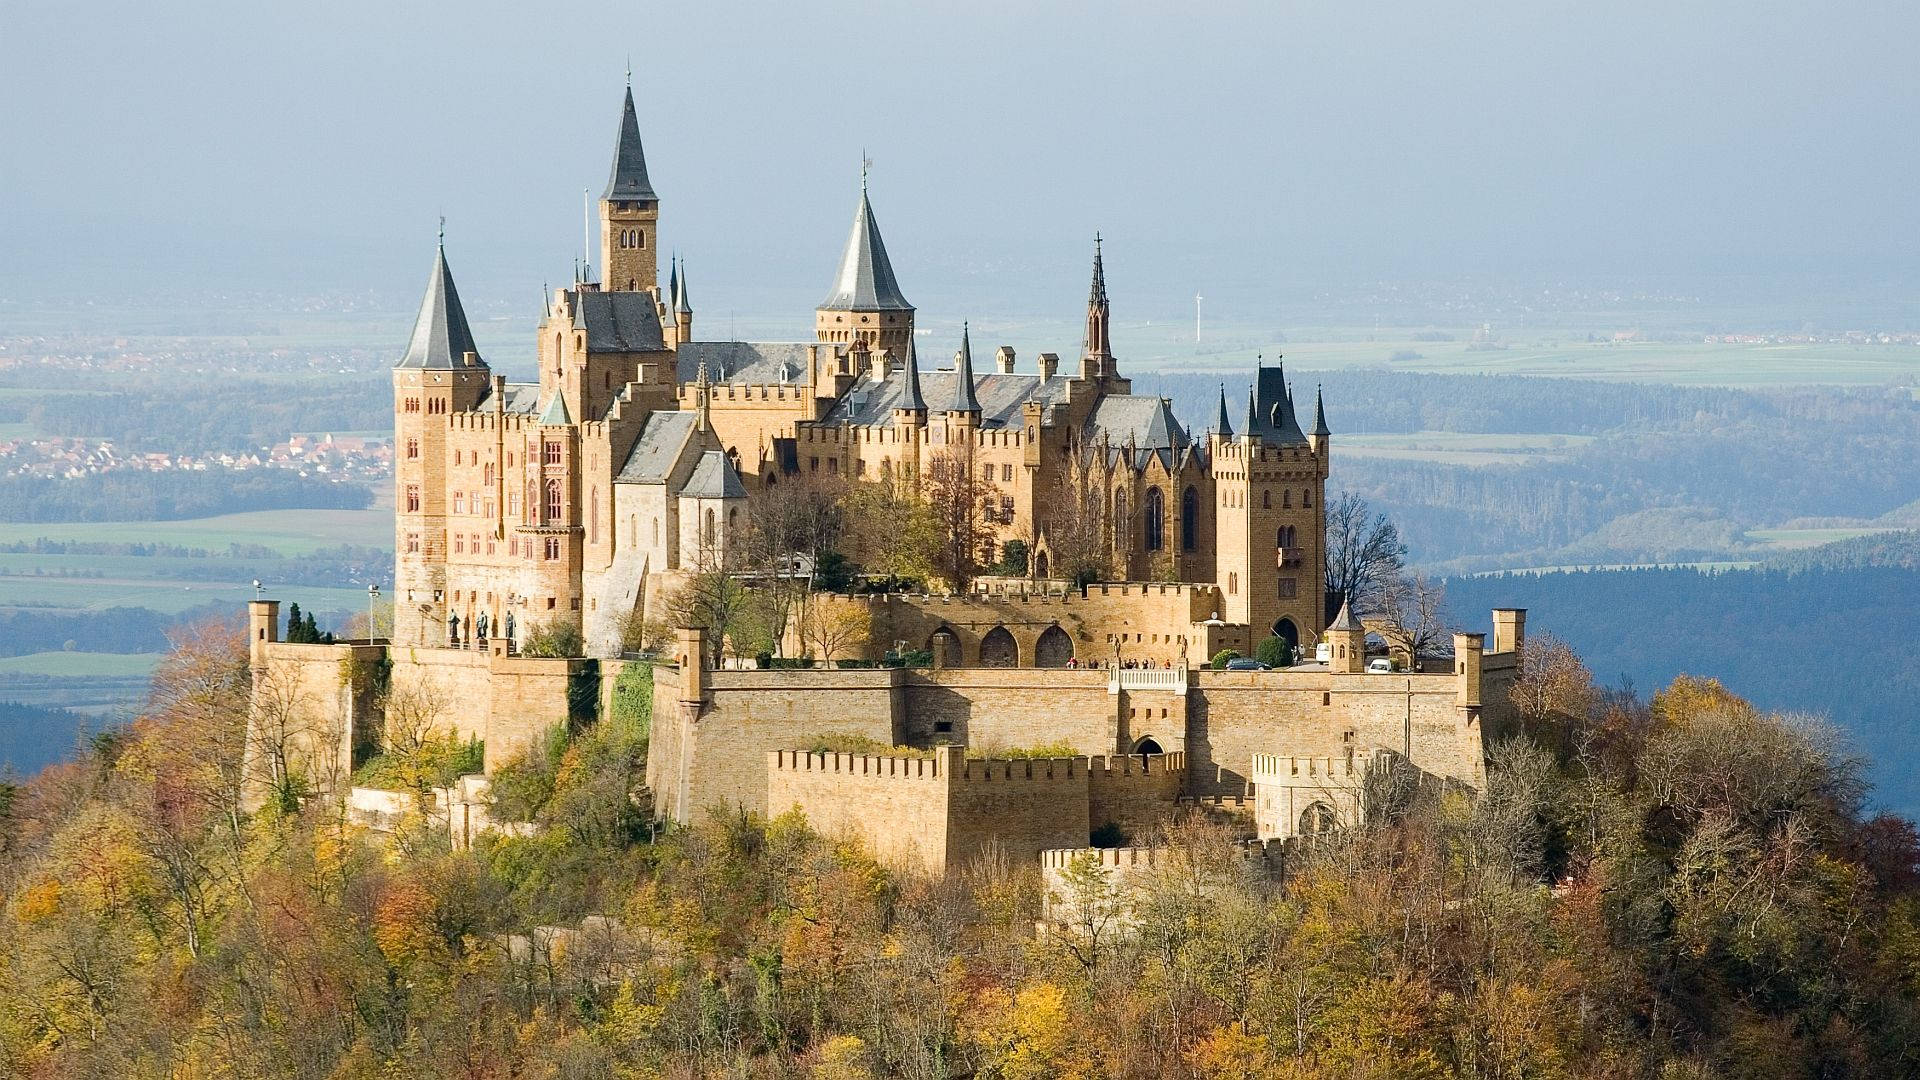 Stand In Awe Of The Imposing Hohenzollern Castle Wallpaper